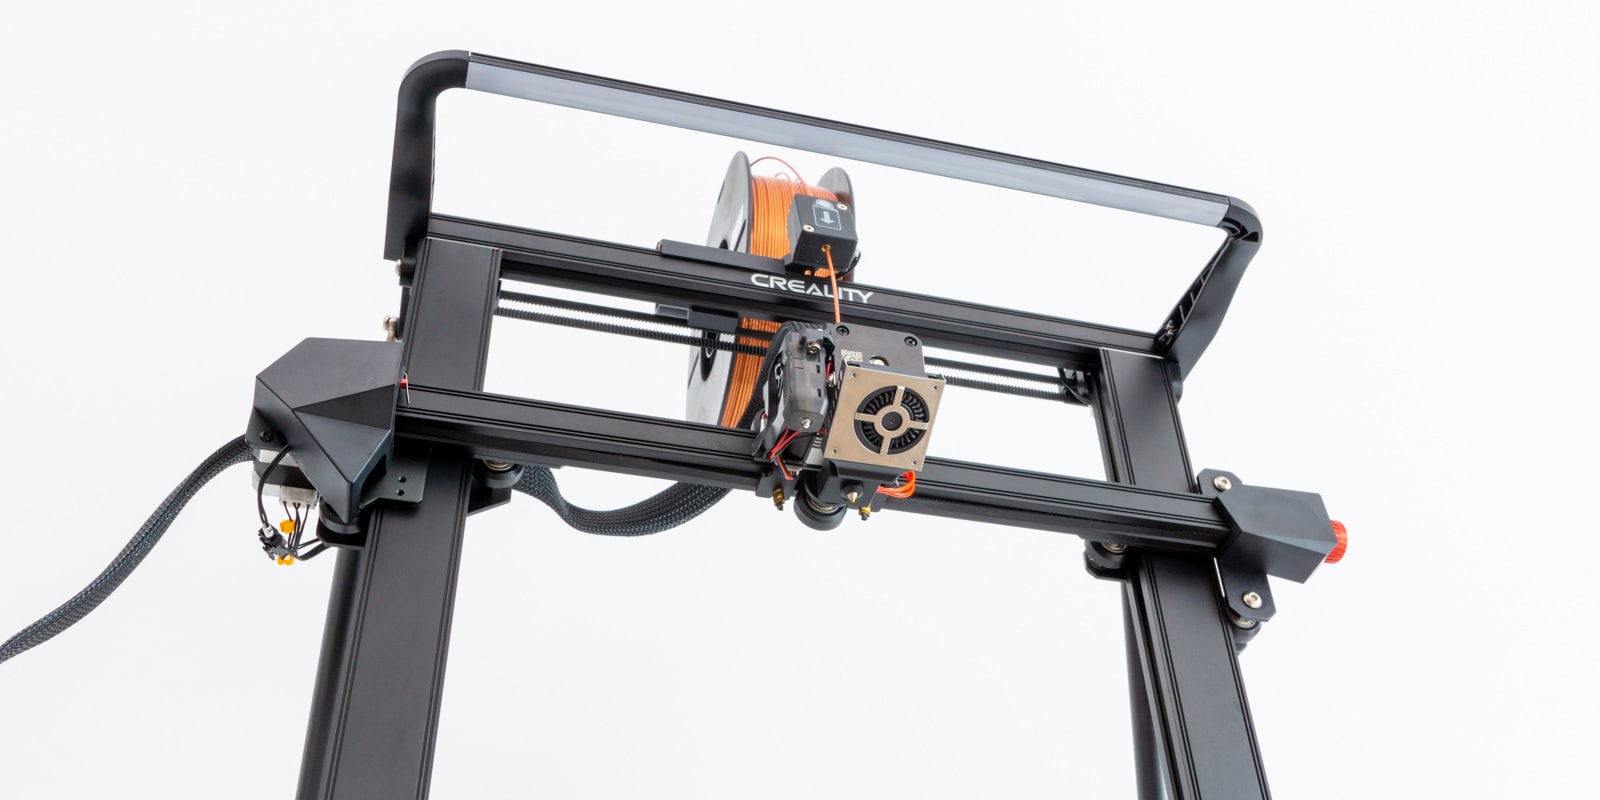 The best large 3D printer for larger scale format 3D printing